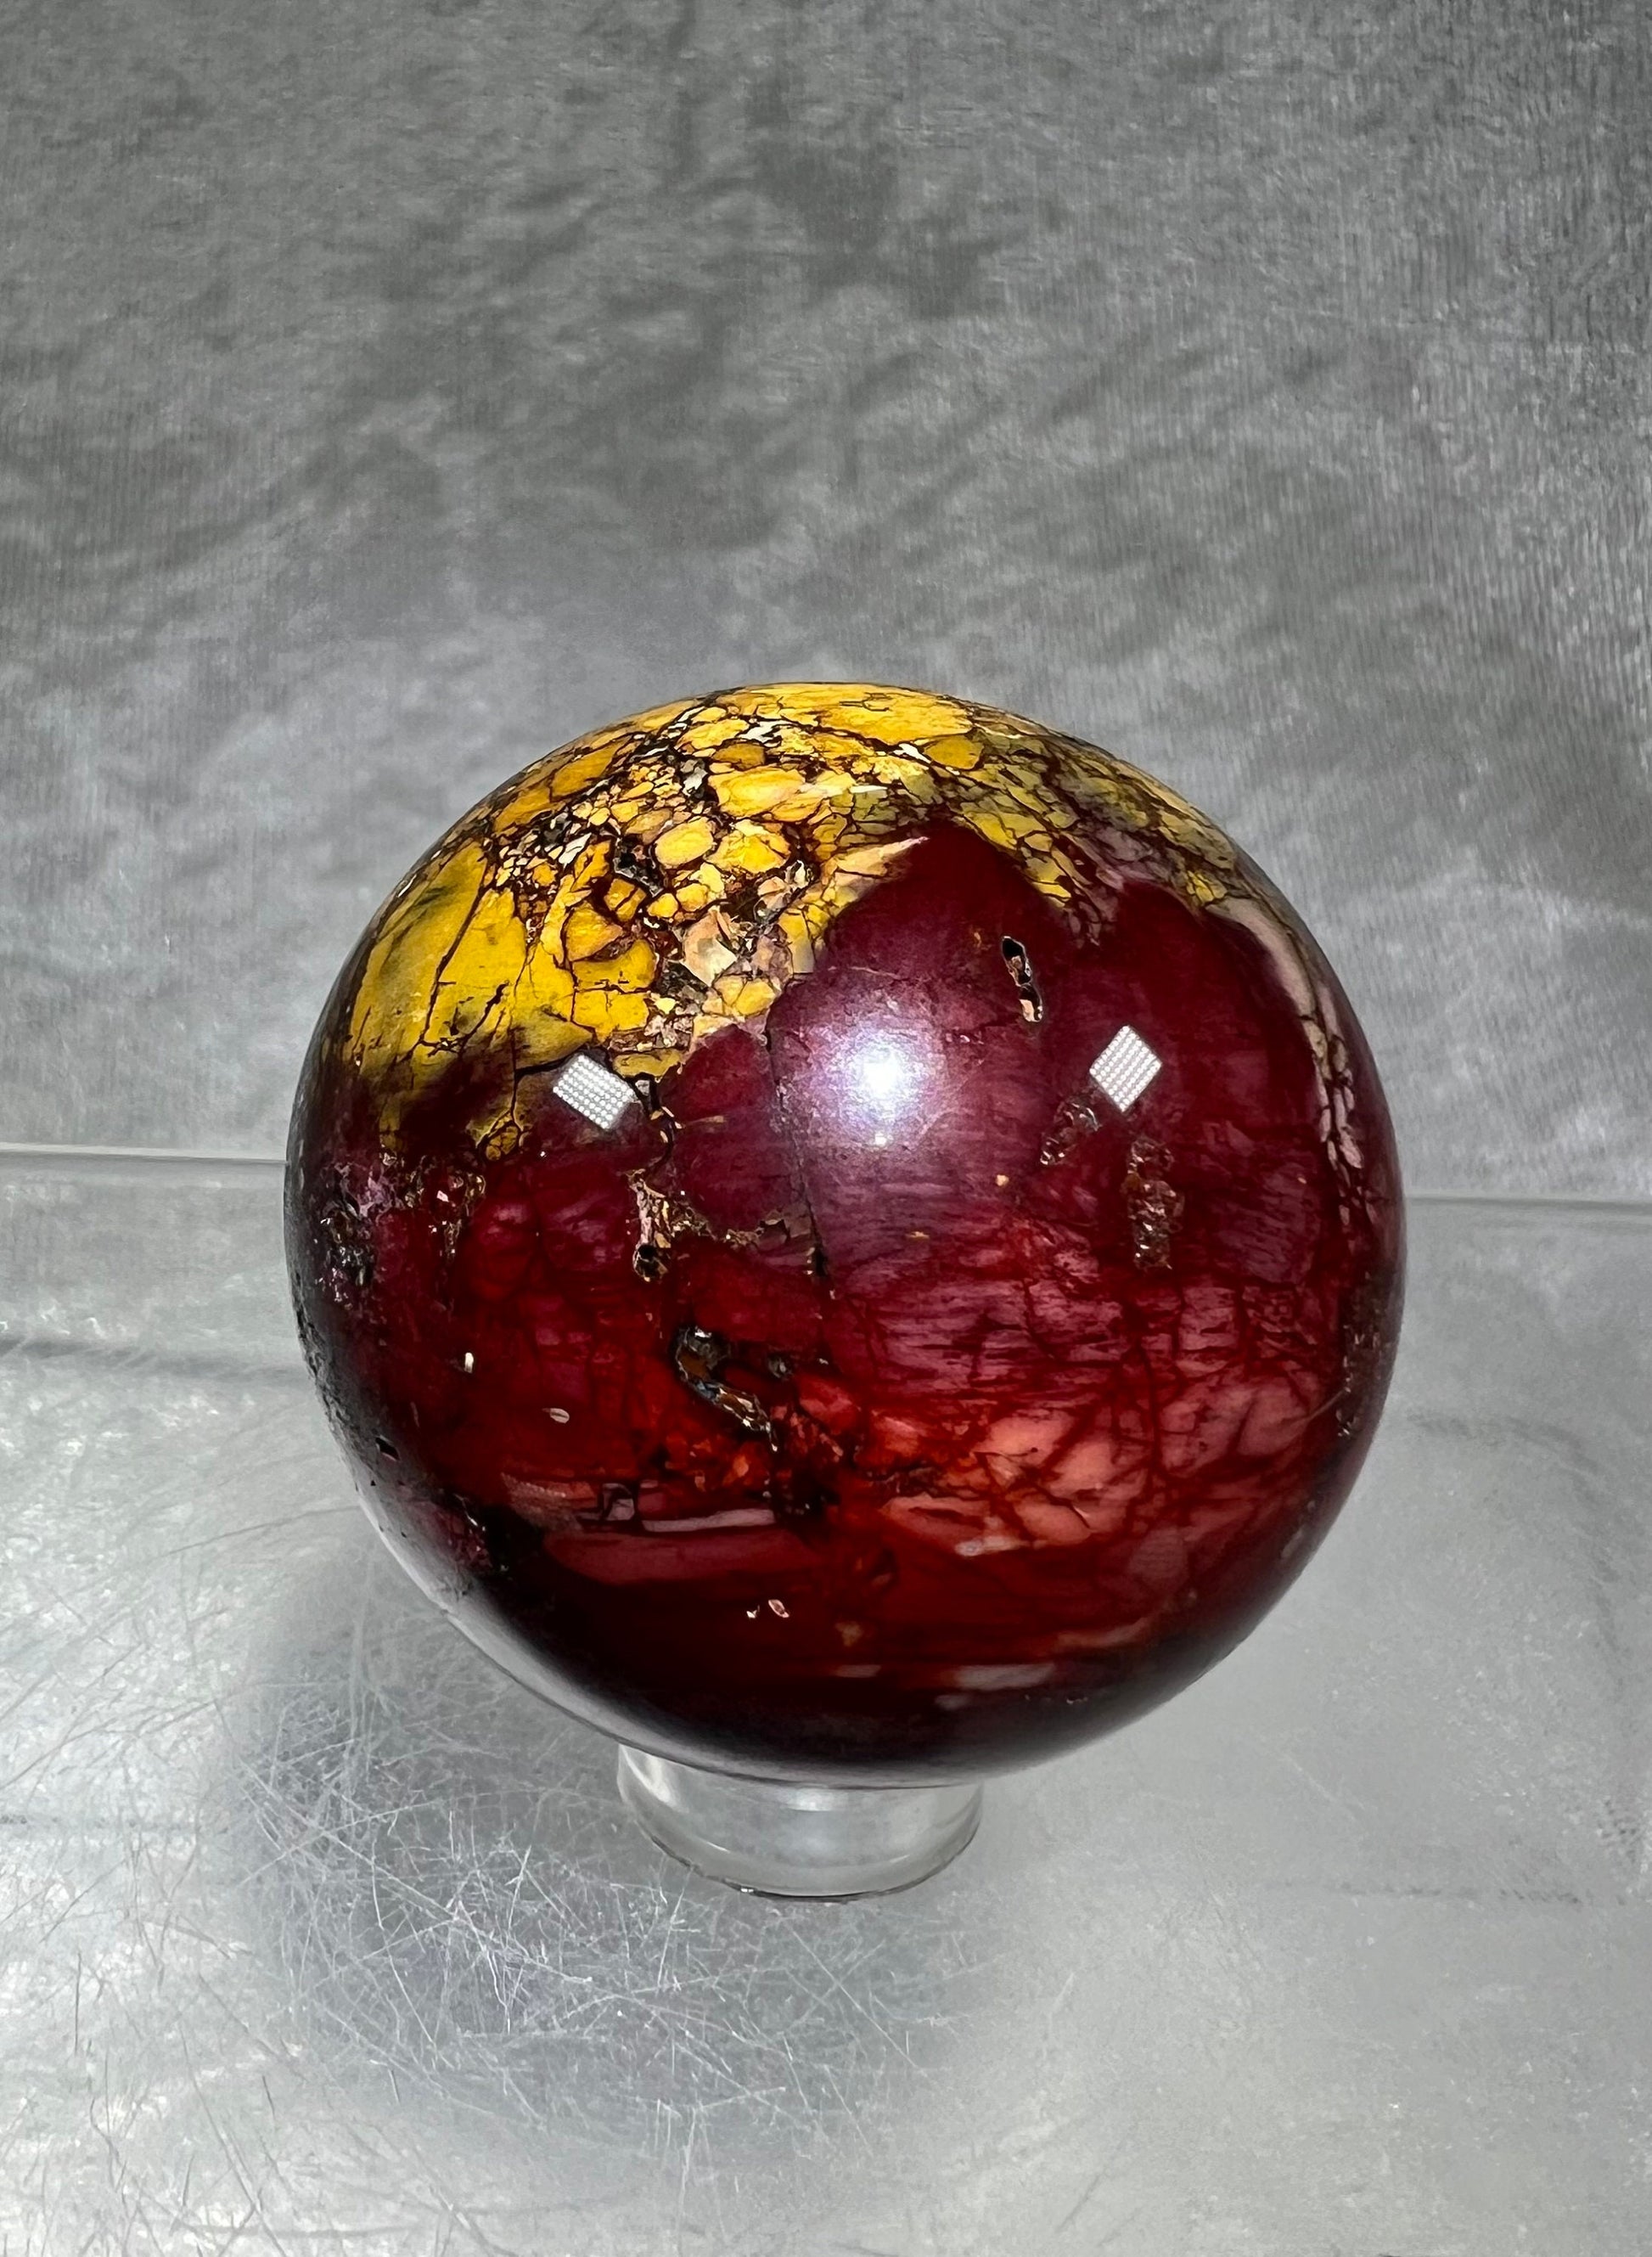 Amazing Red And Yellow Mookaite Sphere. High Quality Crystal. Crazy Mosiac Patterns And Colors!